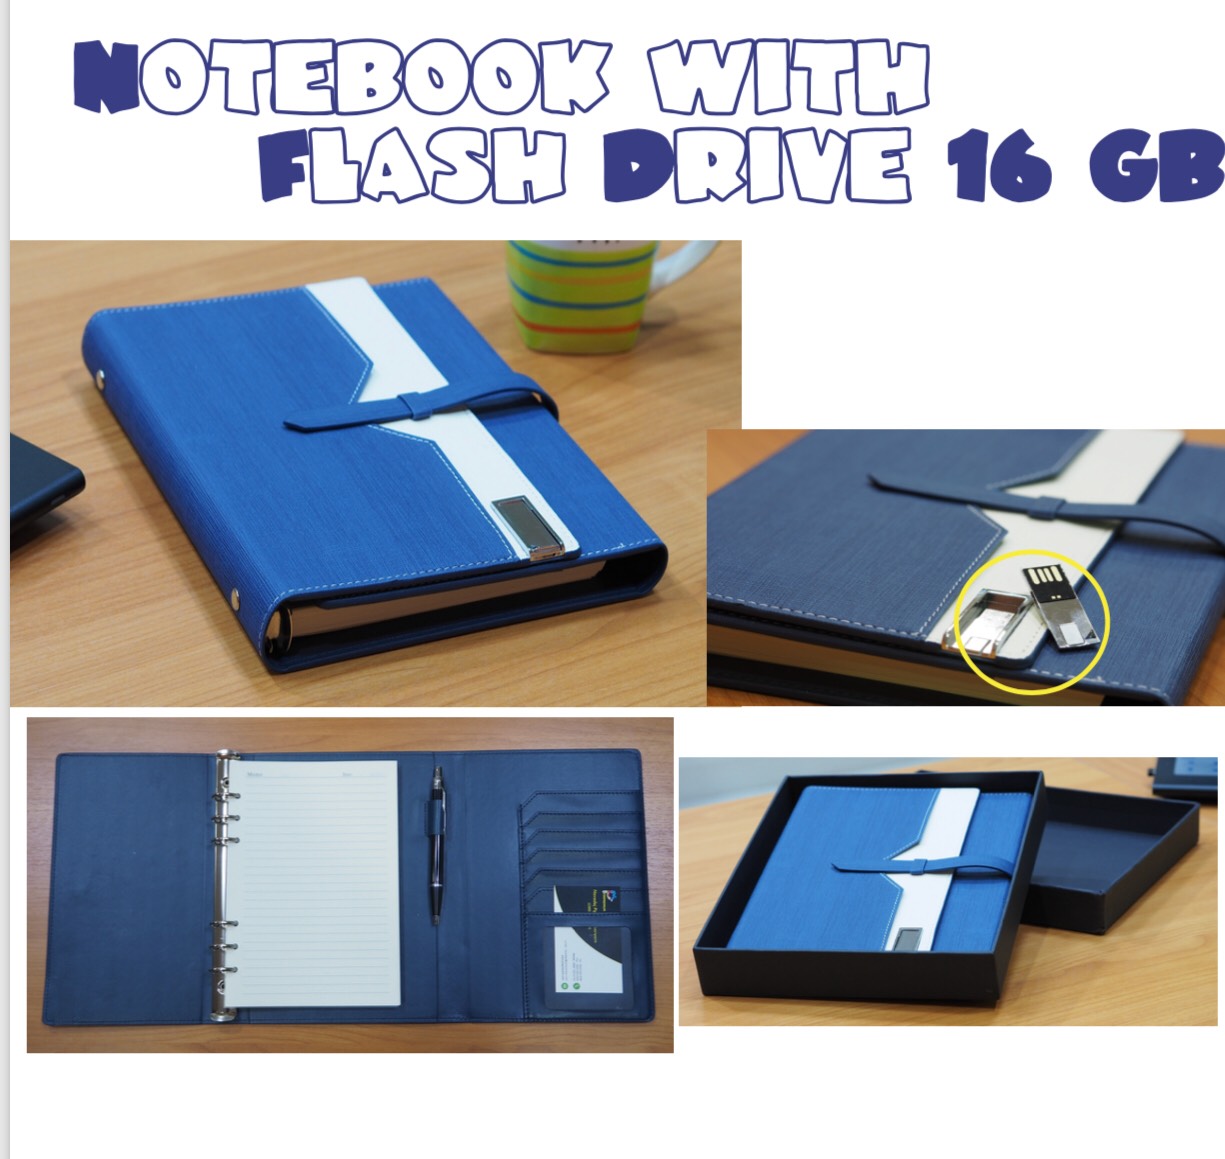 Notebook with Flash Drive 16GB.